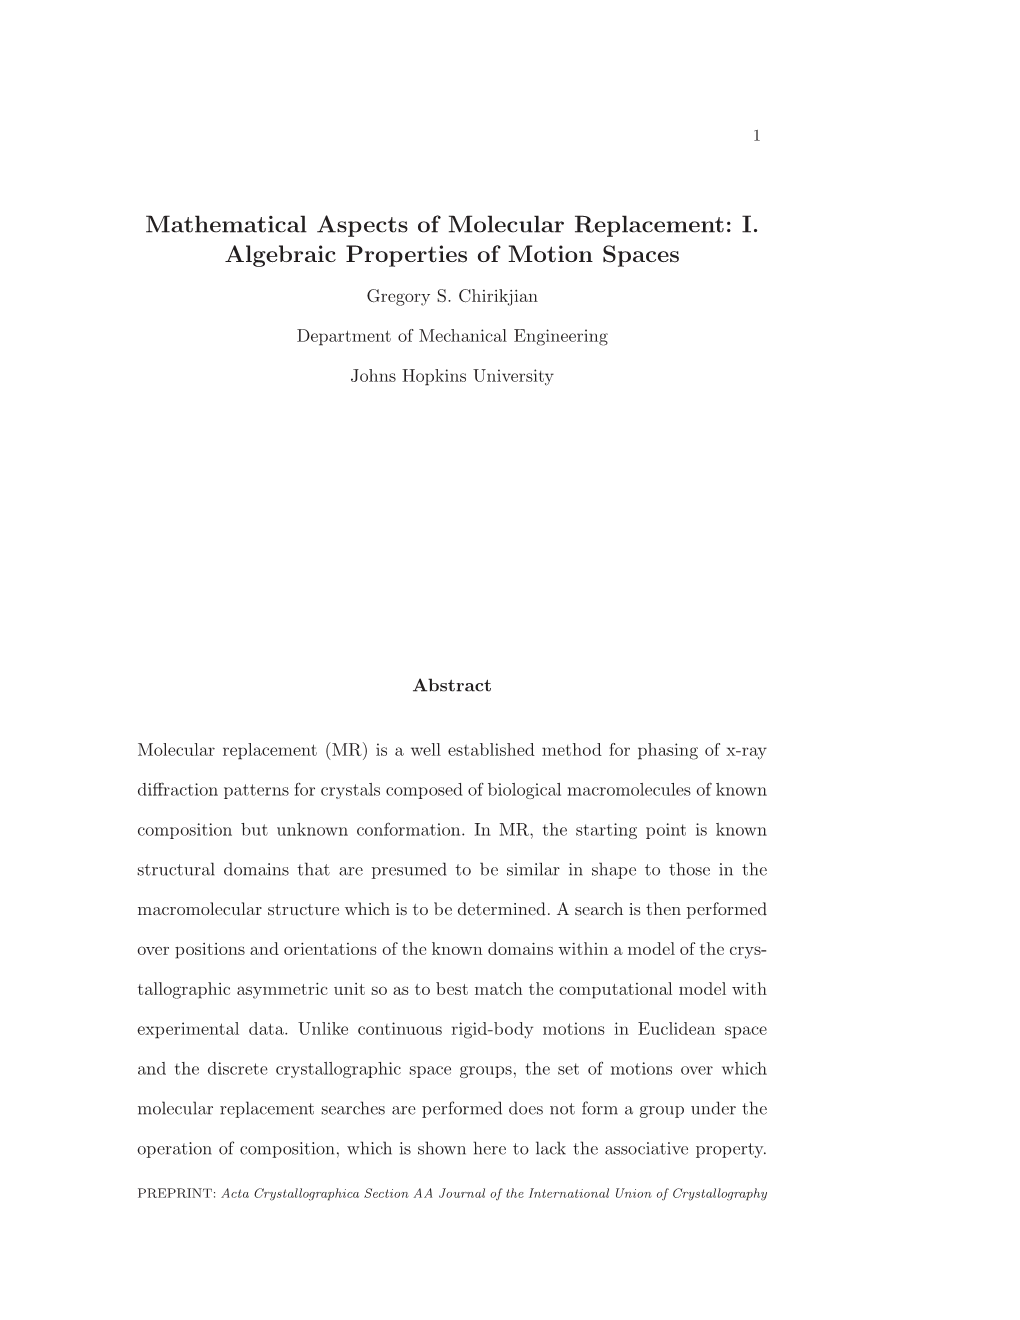 Mathematical Aspects of Molecular Replacement: I. Algebraic Properties of Motion Spaces